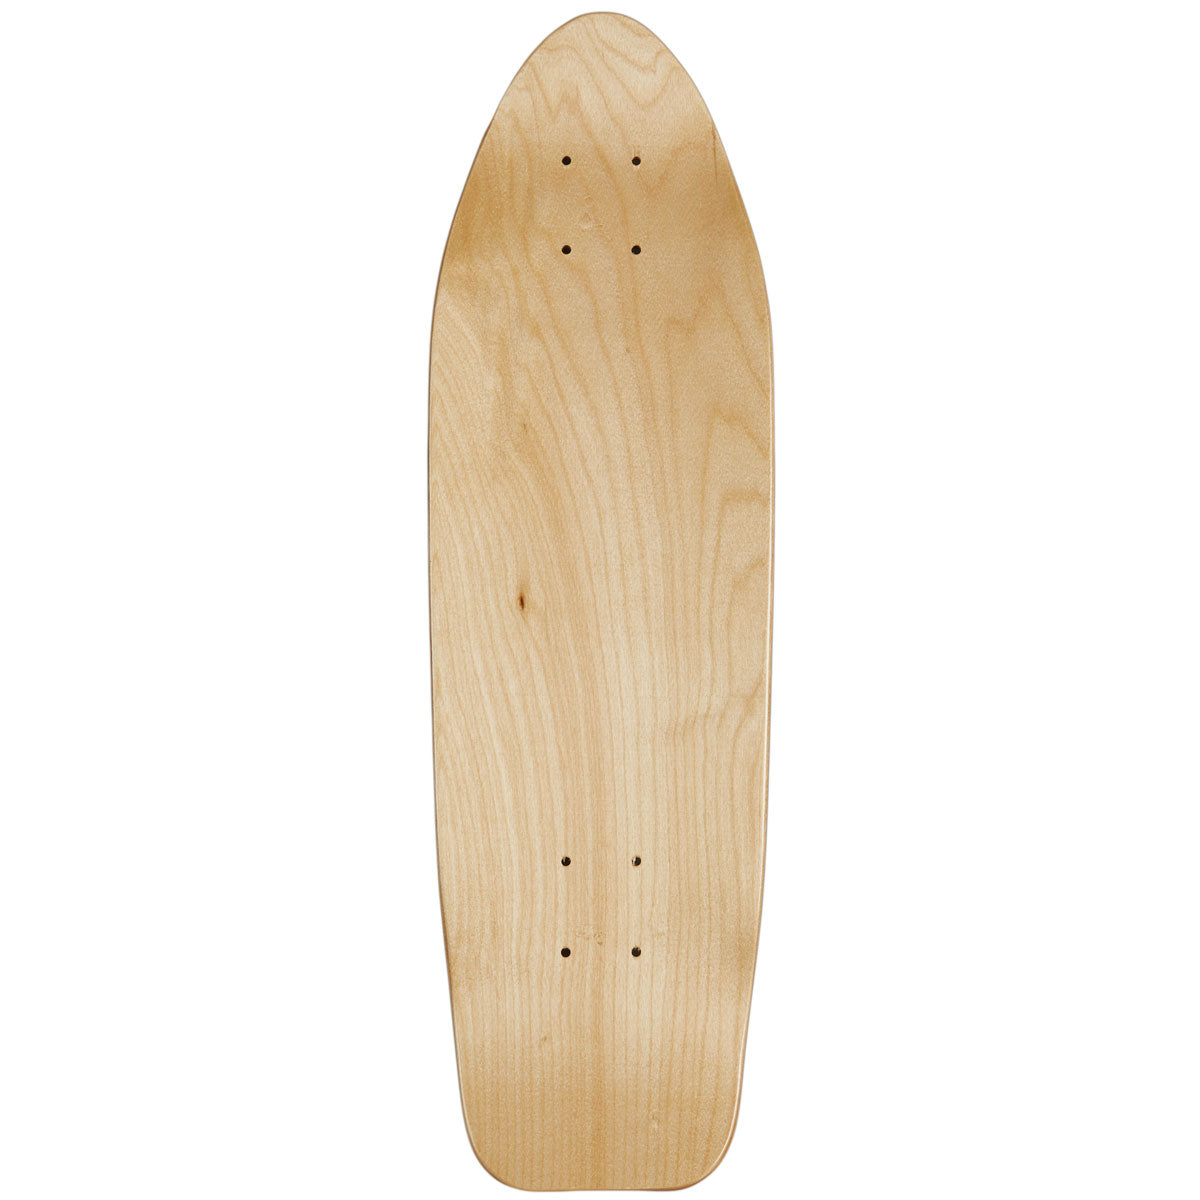 Rout Palms Cruiser Skateboard Complete image 2